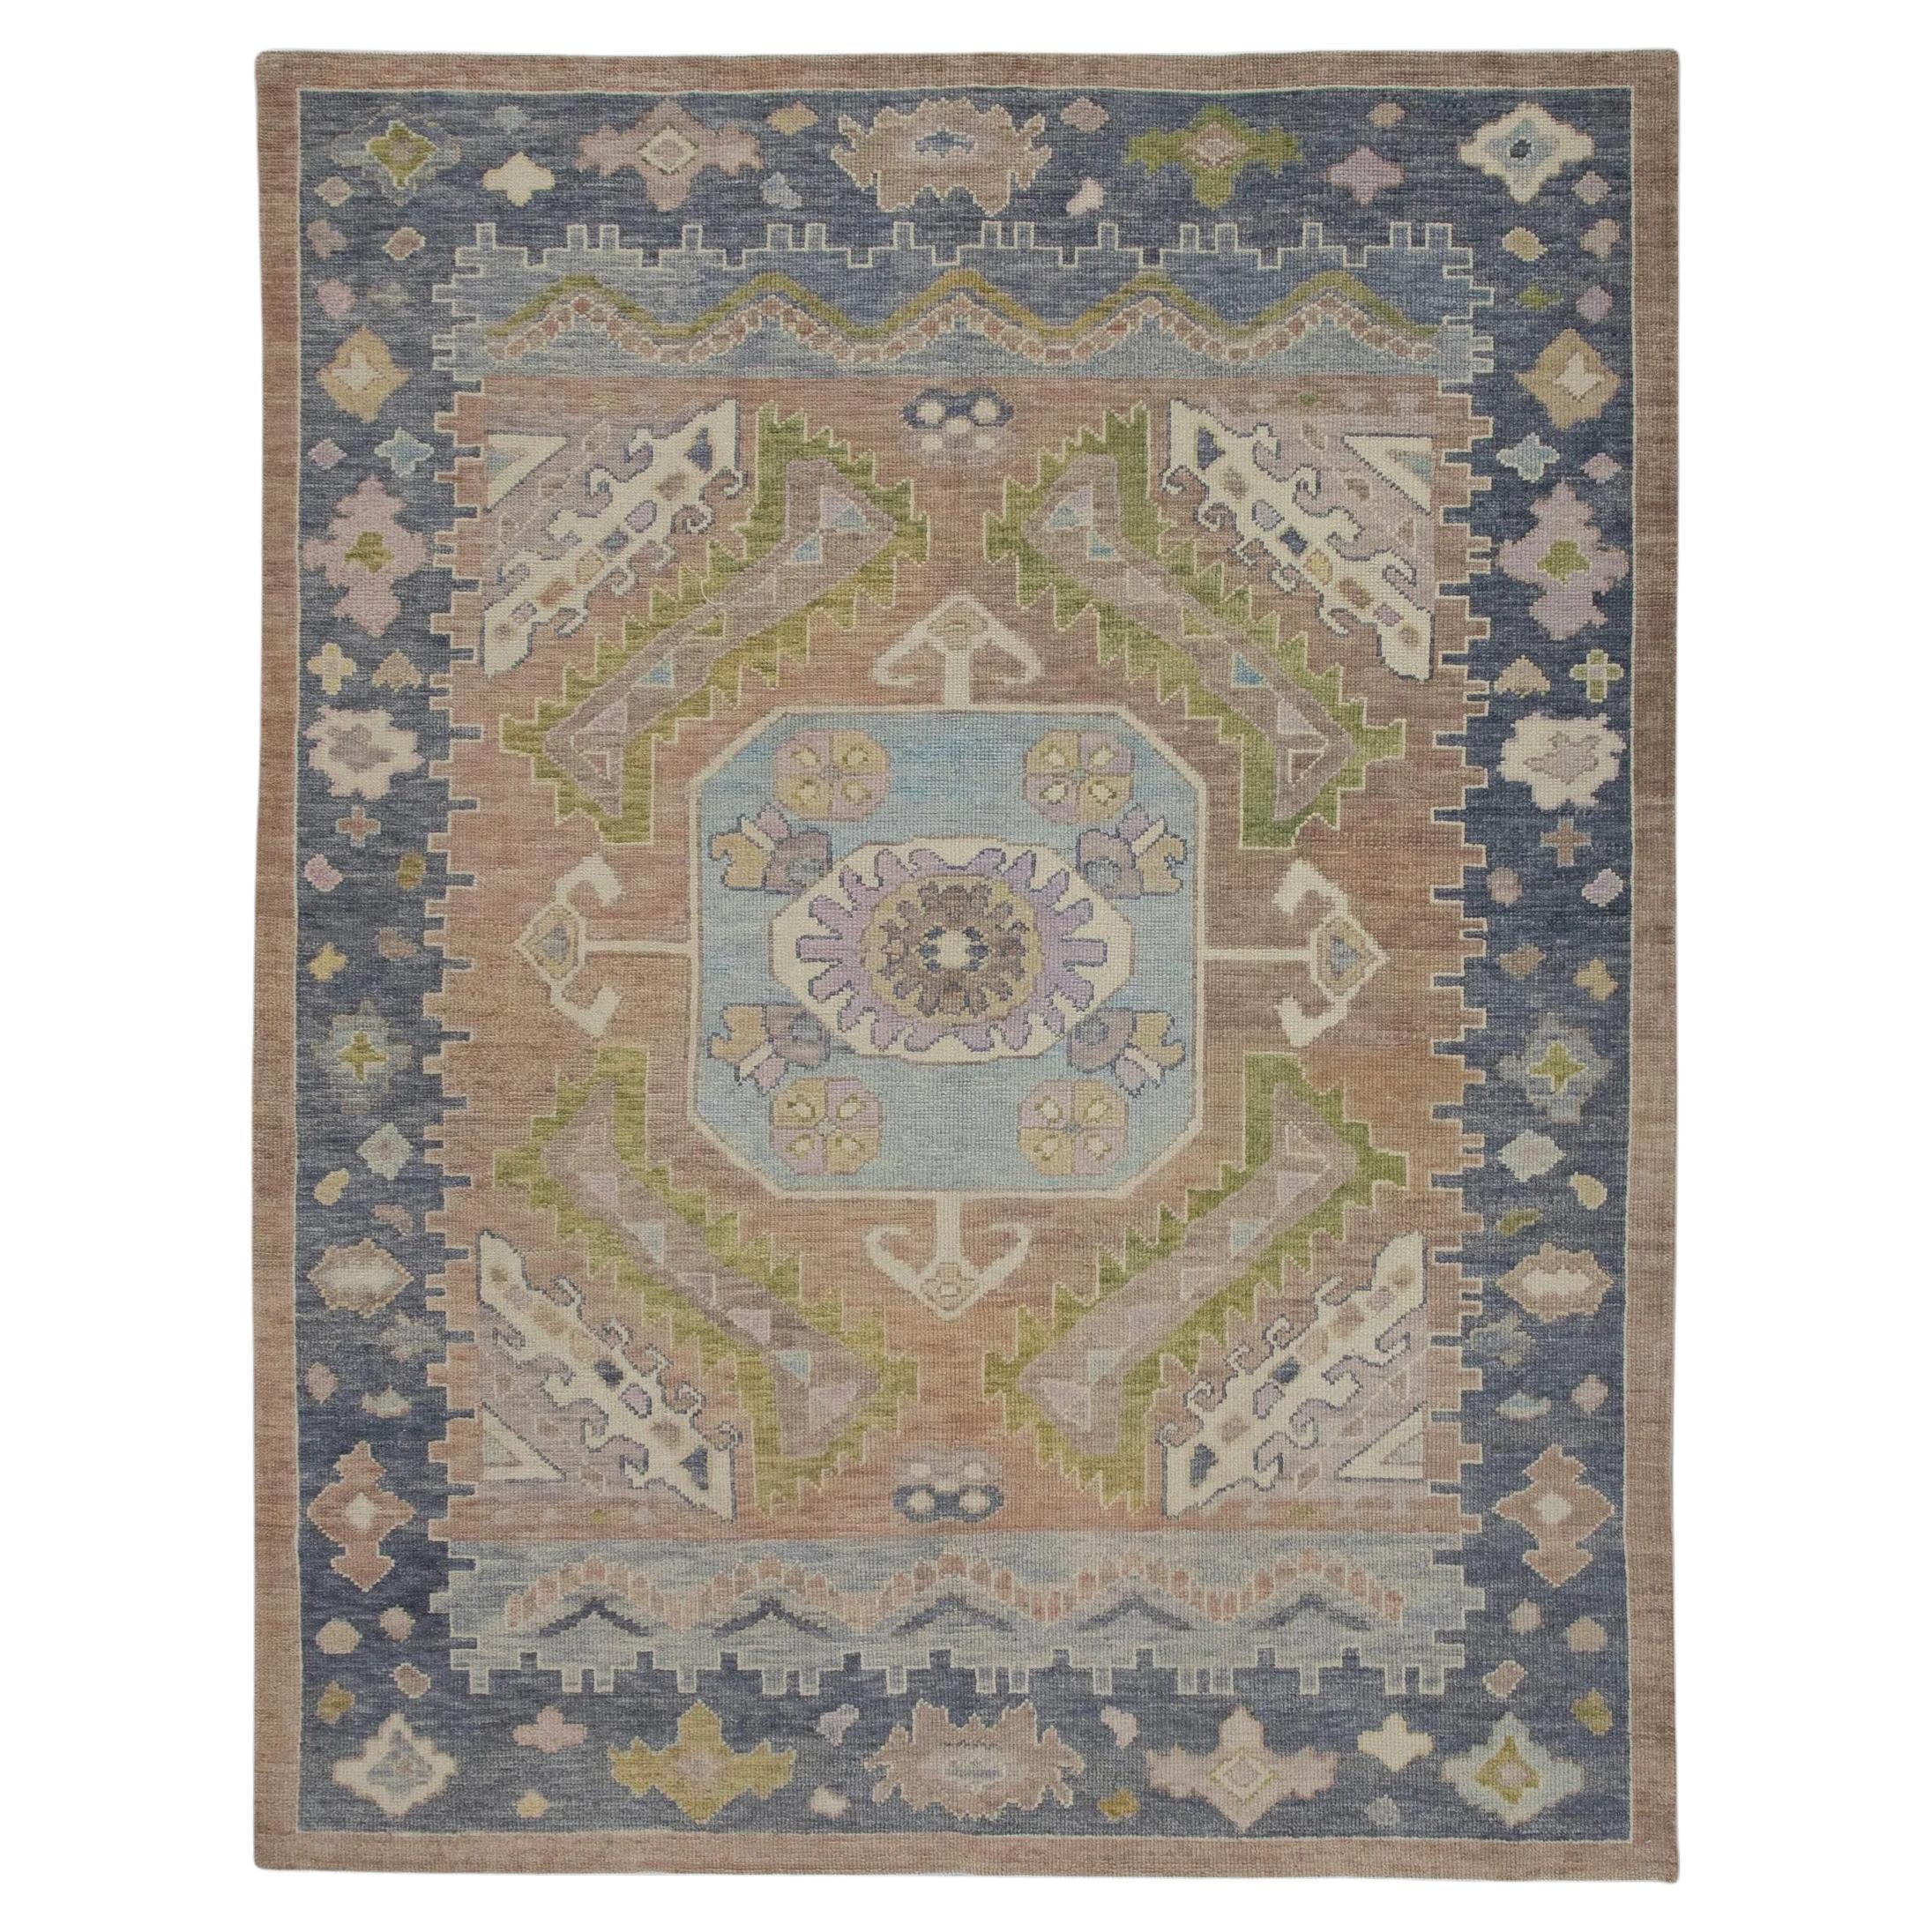 Multicolor Floral Handwoven Wool Turkish Oushak Rug 6'3" x 8'1"